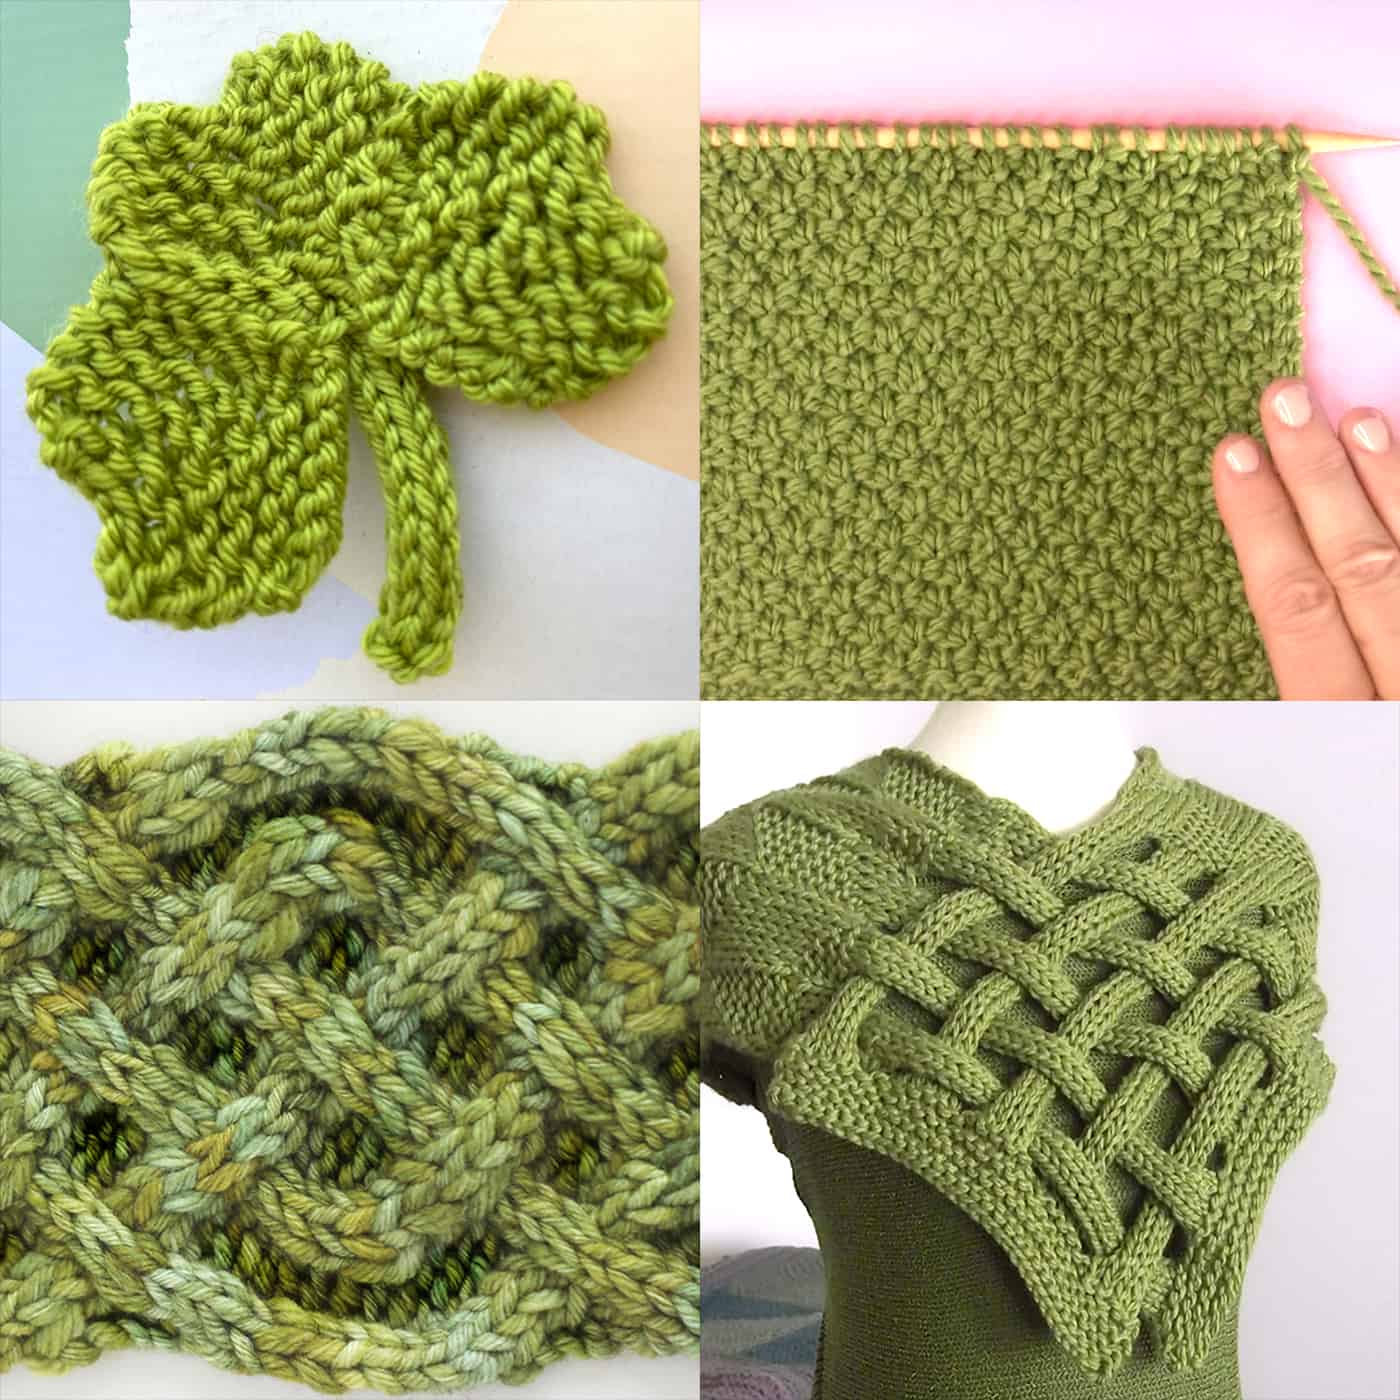 Collection of four Irish-inspired knitting patterns in green yarn colors with shamrock, irish moss, celtic cable, and scarf designs.